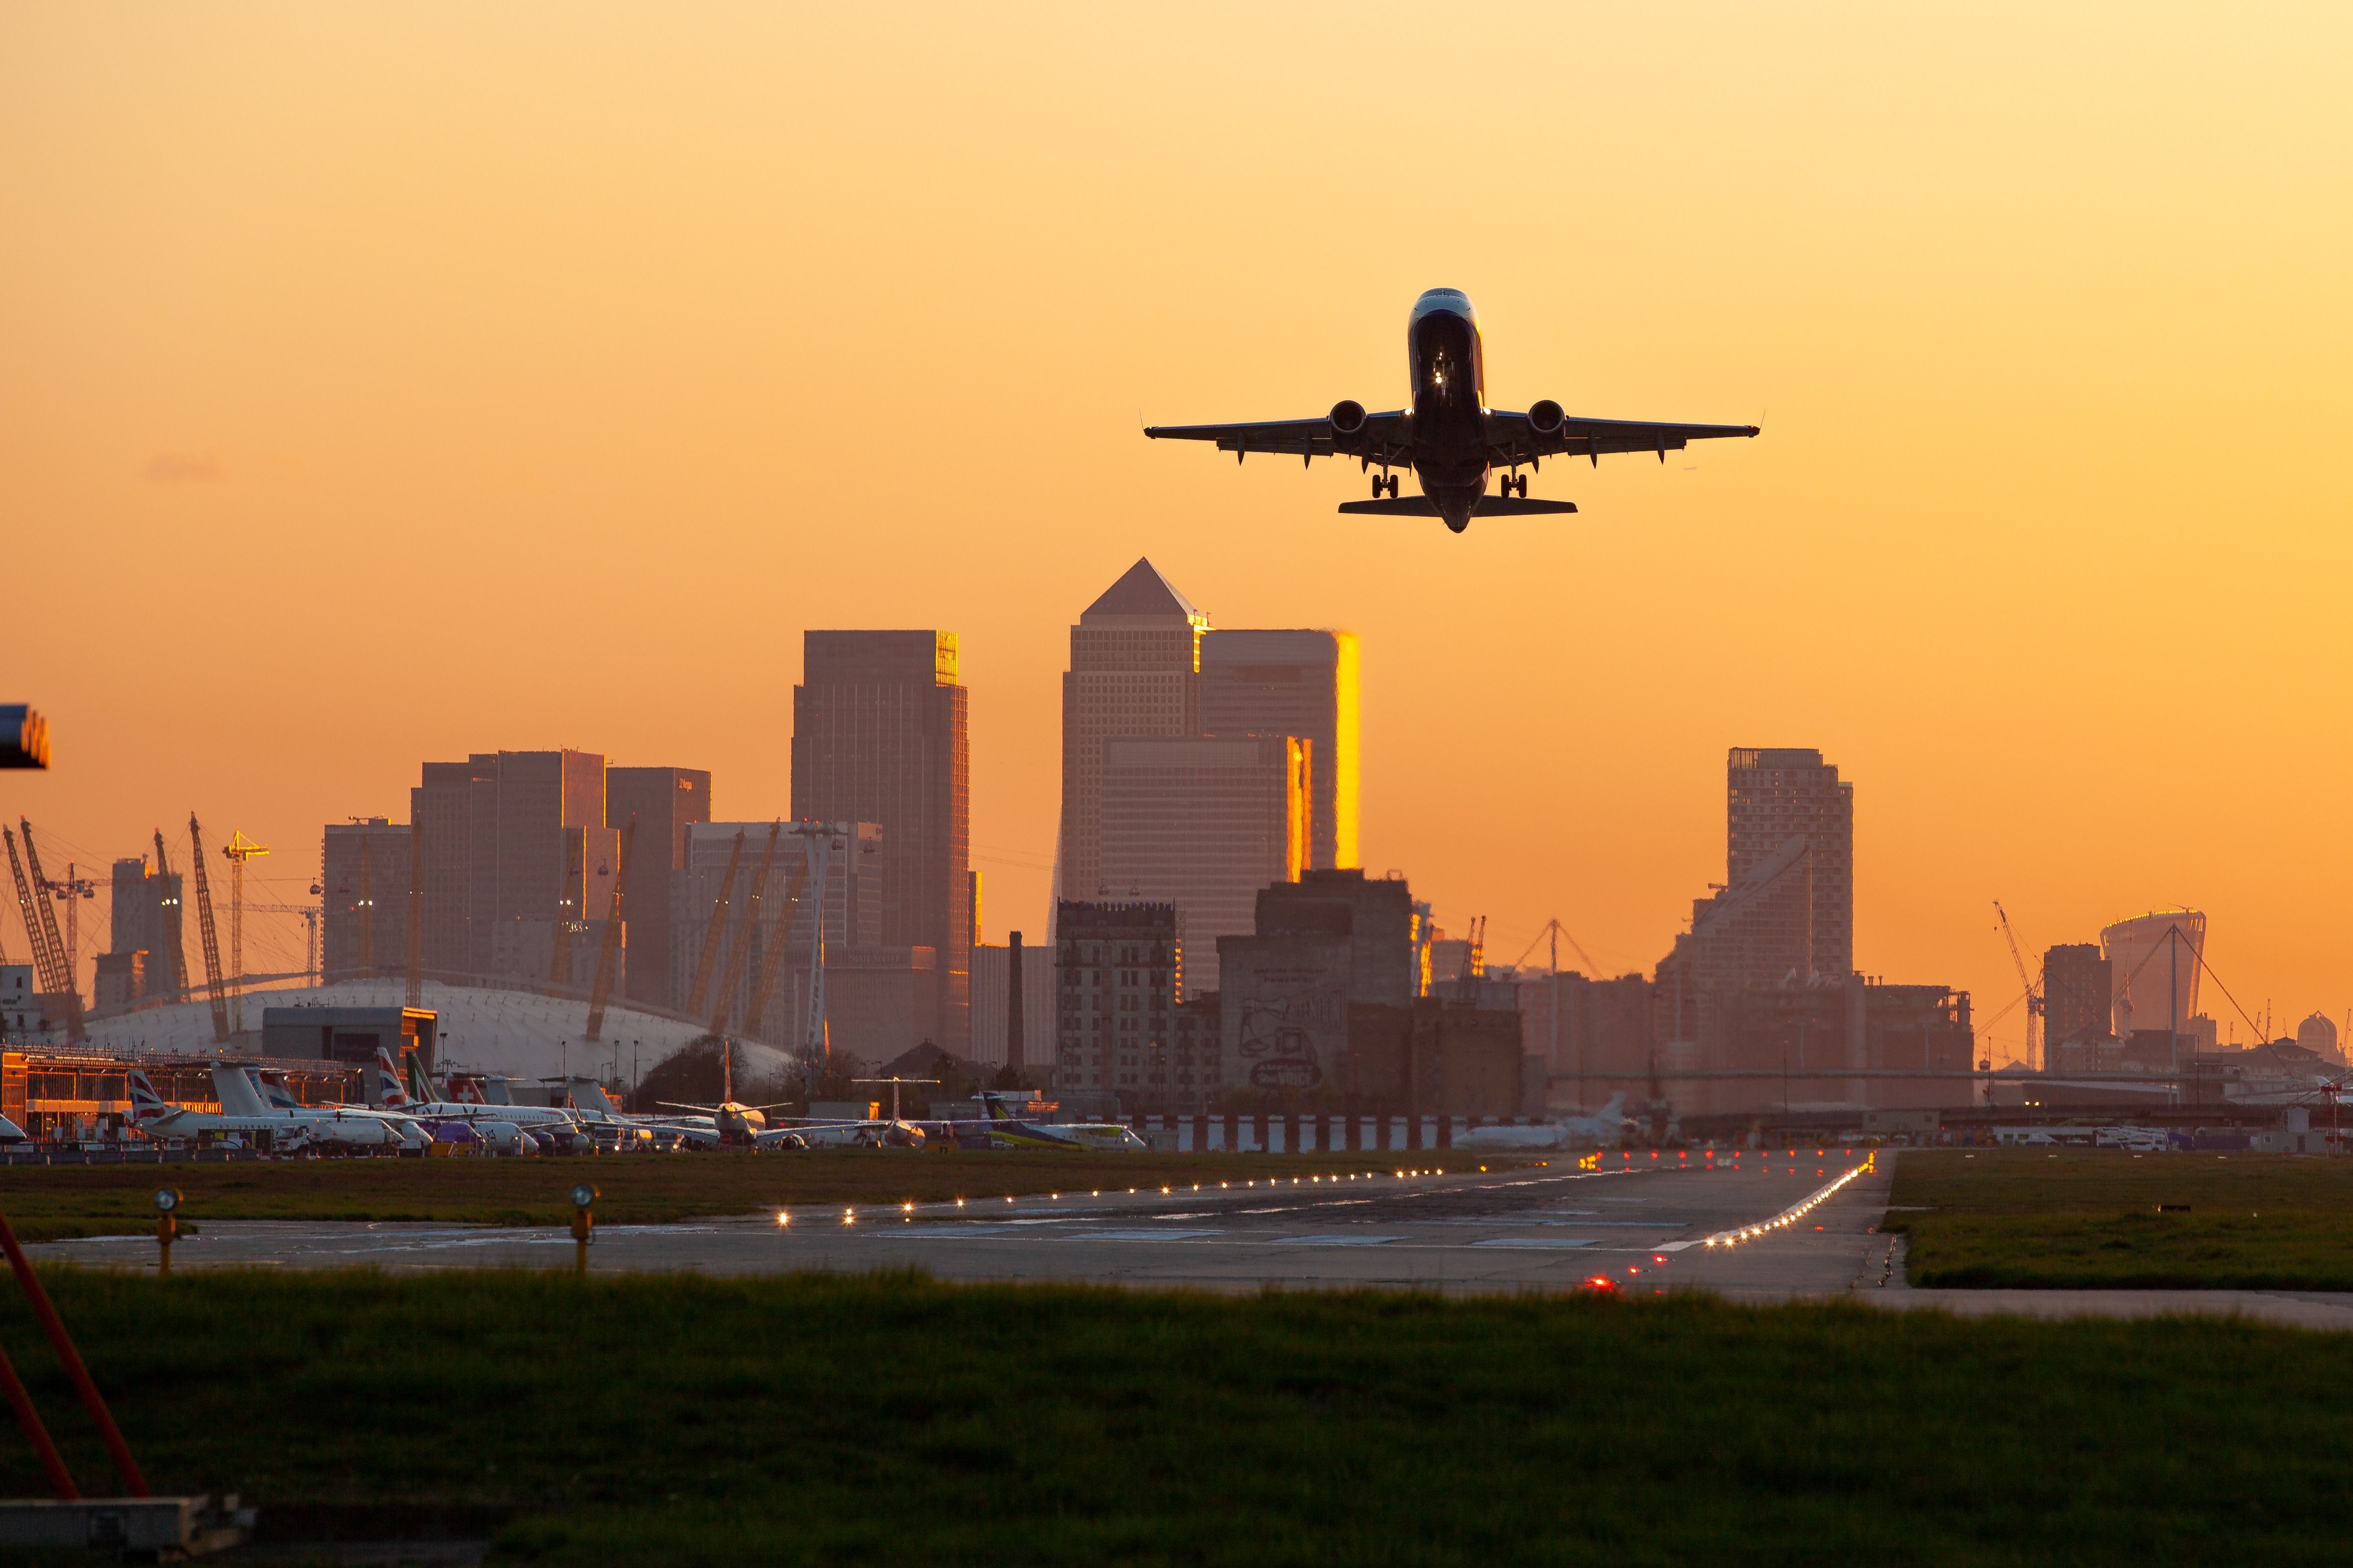 An aircraft departing from London City Airport.